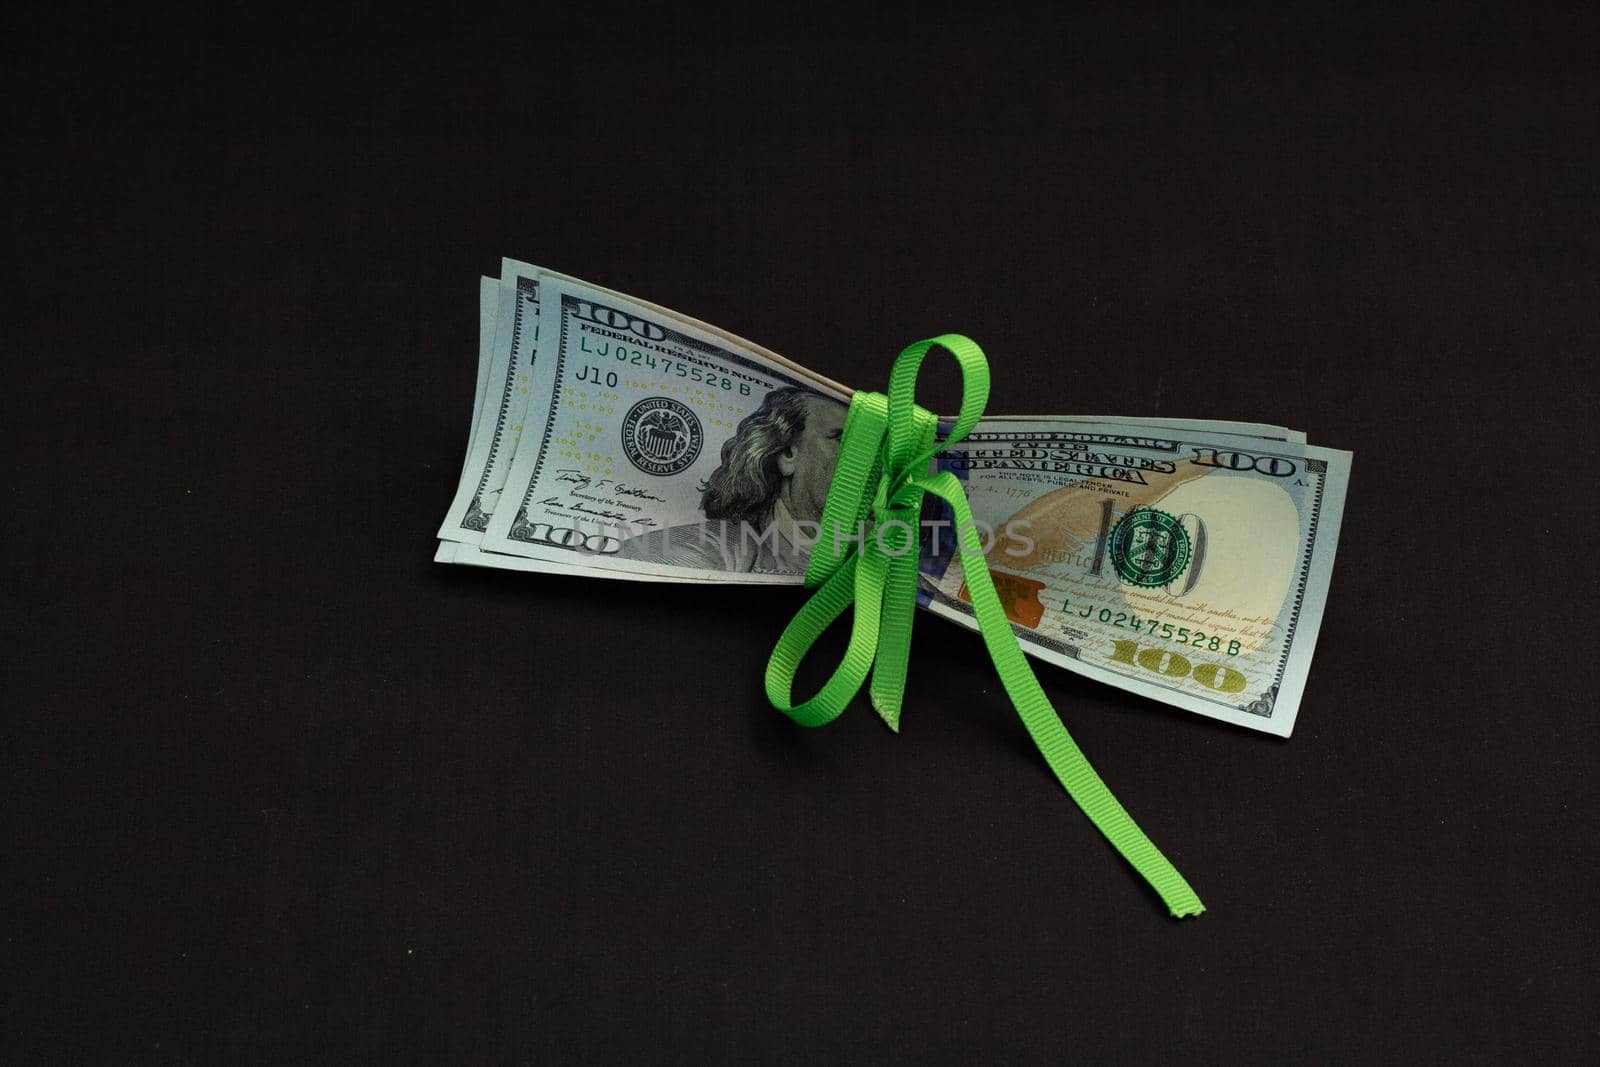 American cash money, banknotes of us dollars on black background tied with green ribbon the middle of it, one hundred dollar bills in stack